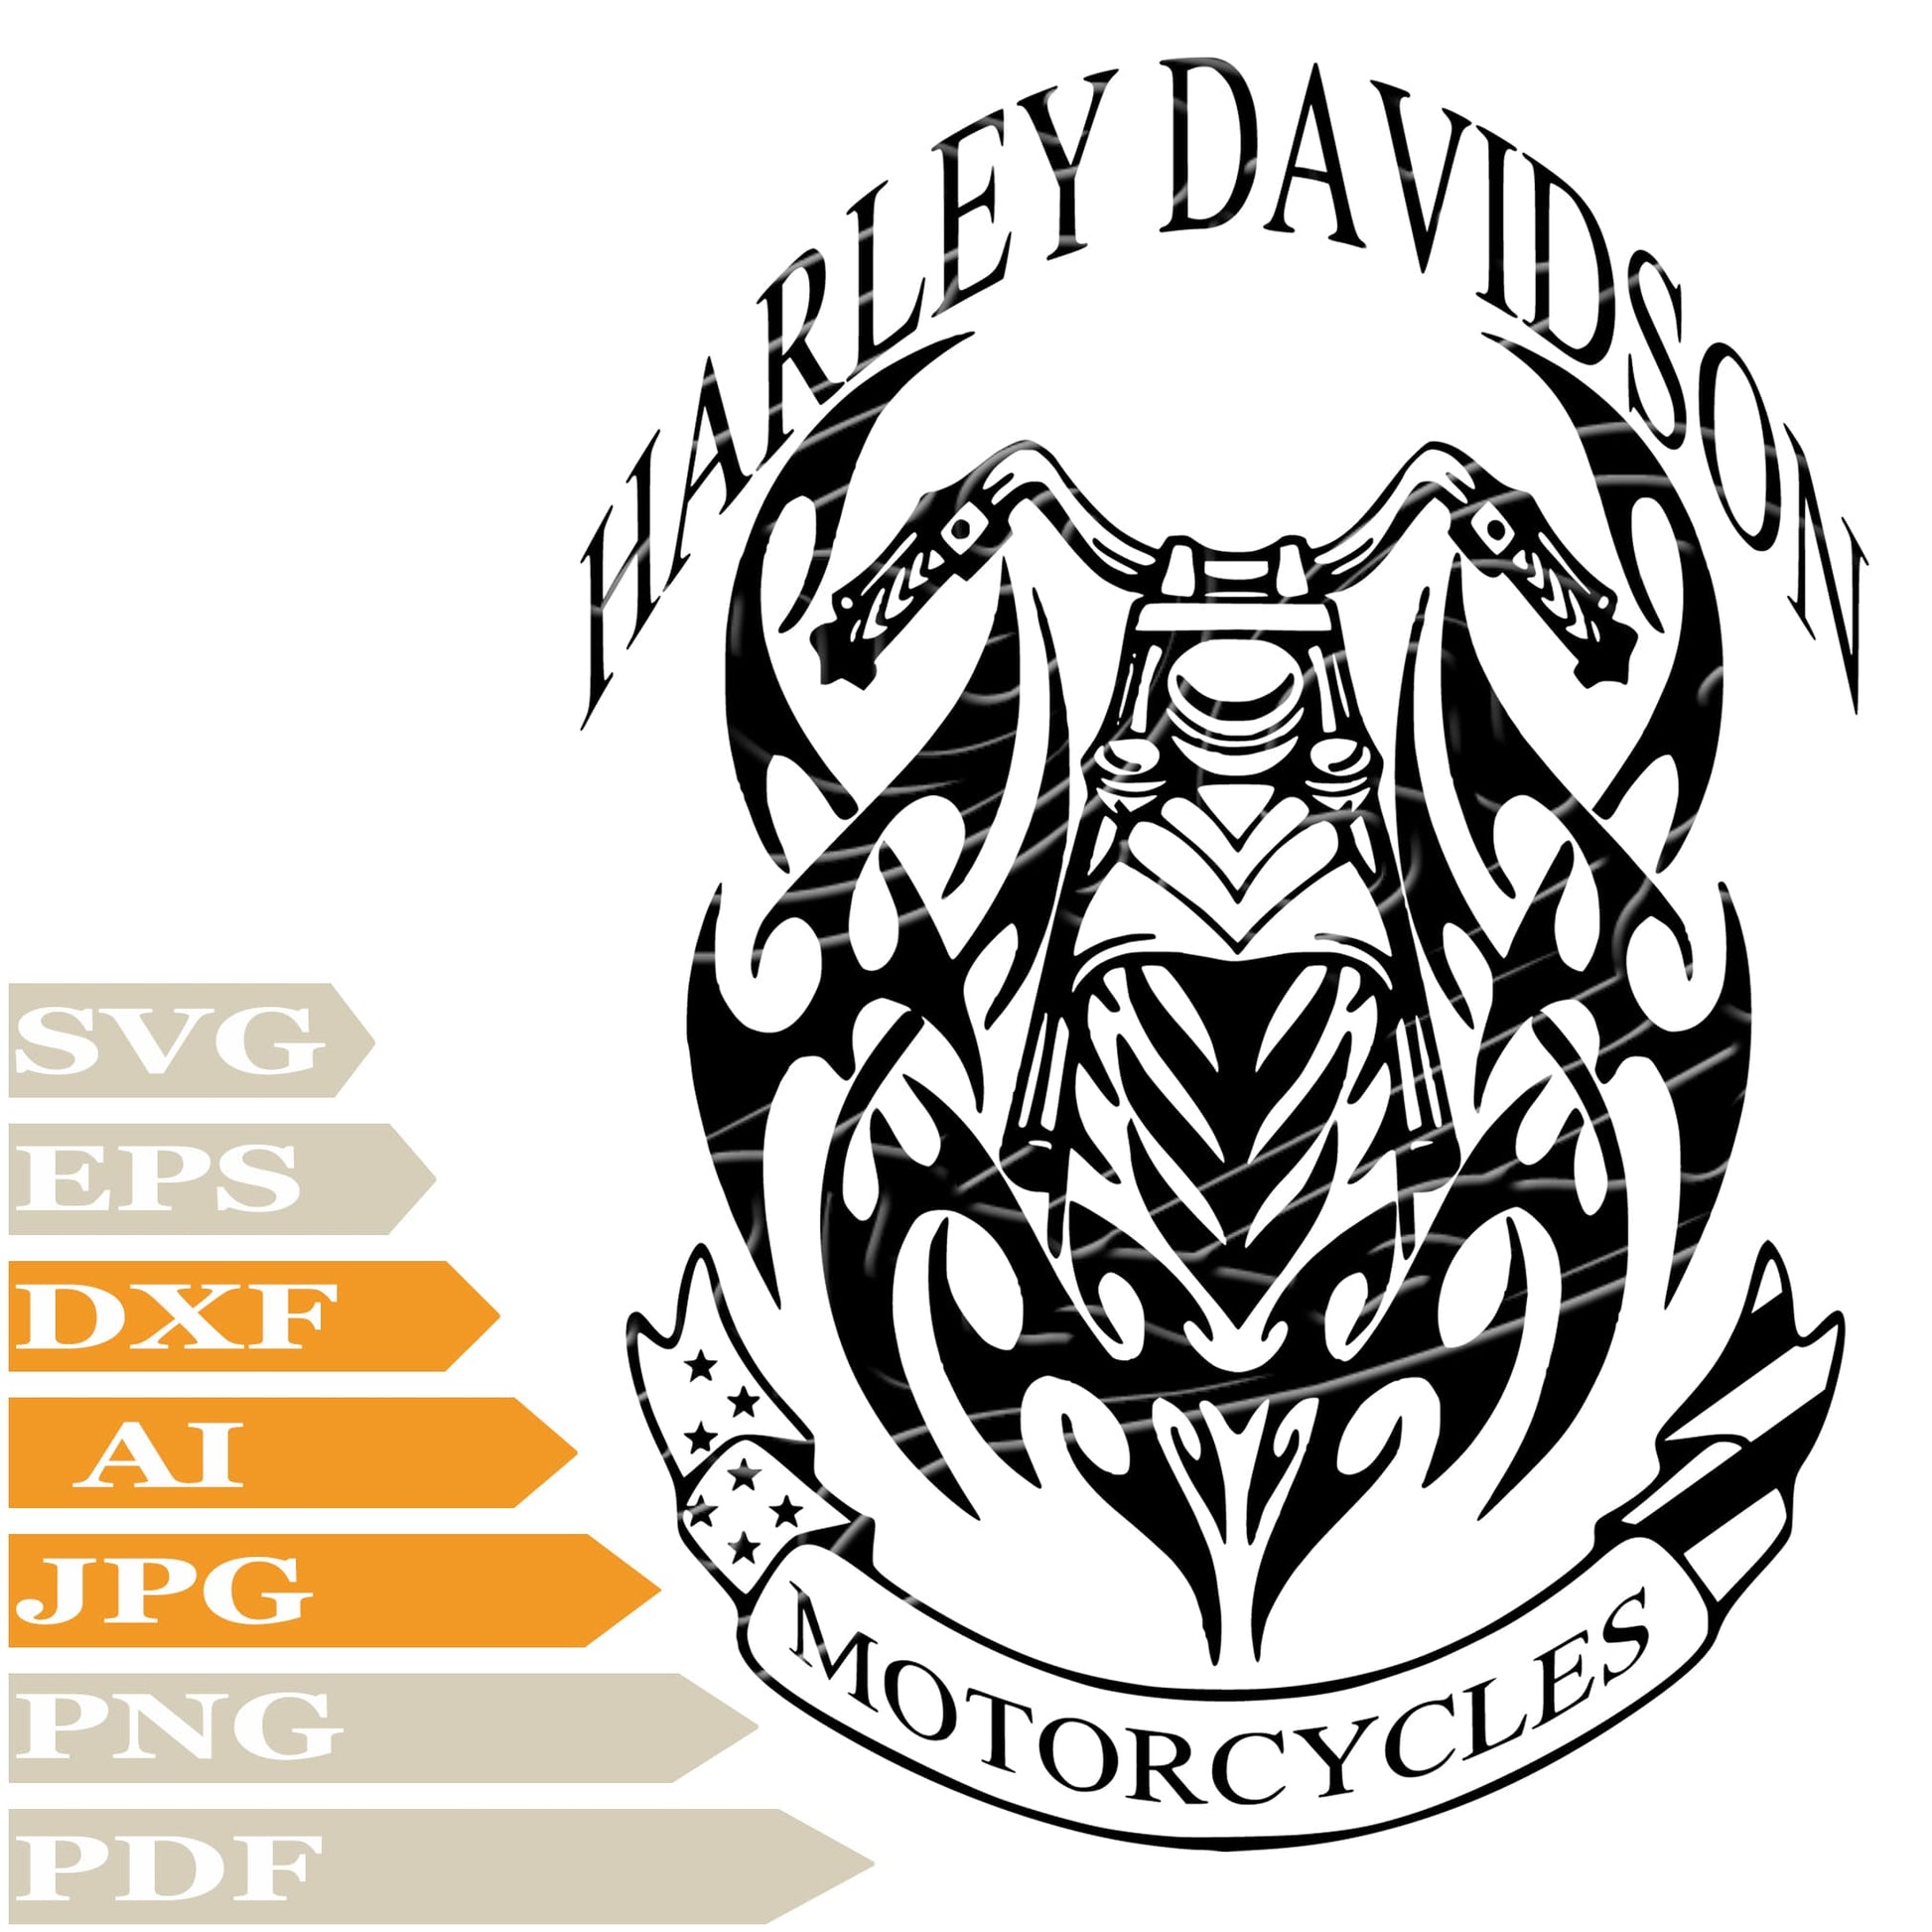 Harley Davidson, Motorcycles Harley Davidson Logo Svg File, Image Cut, Png, For Tattoo, Silhouette, Digital Vector Download, Cut File, Clipart, For Cricut